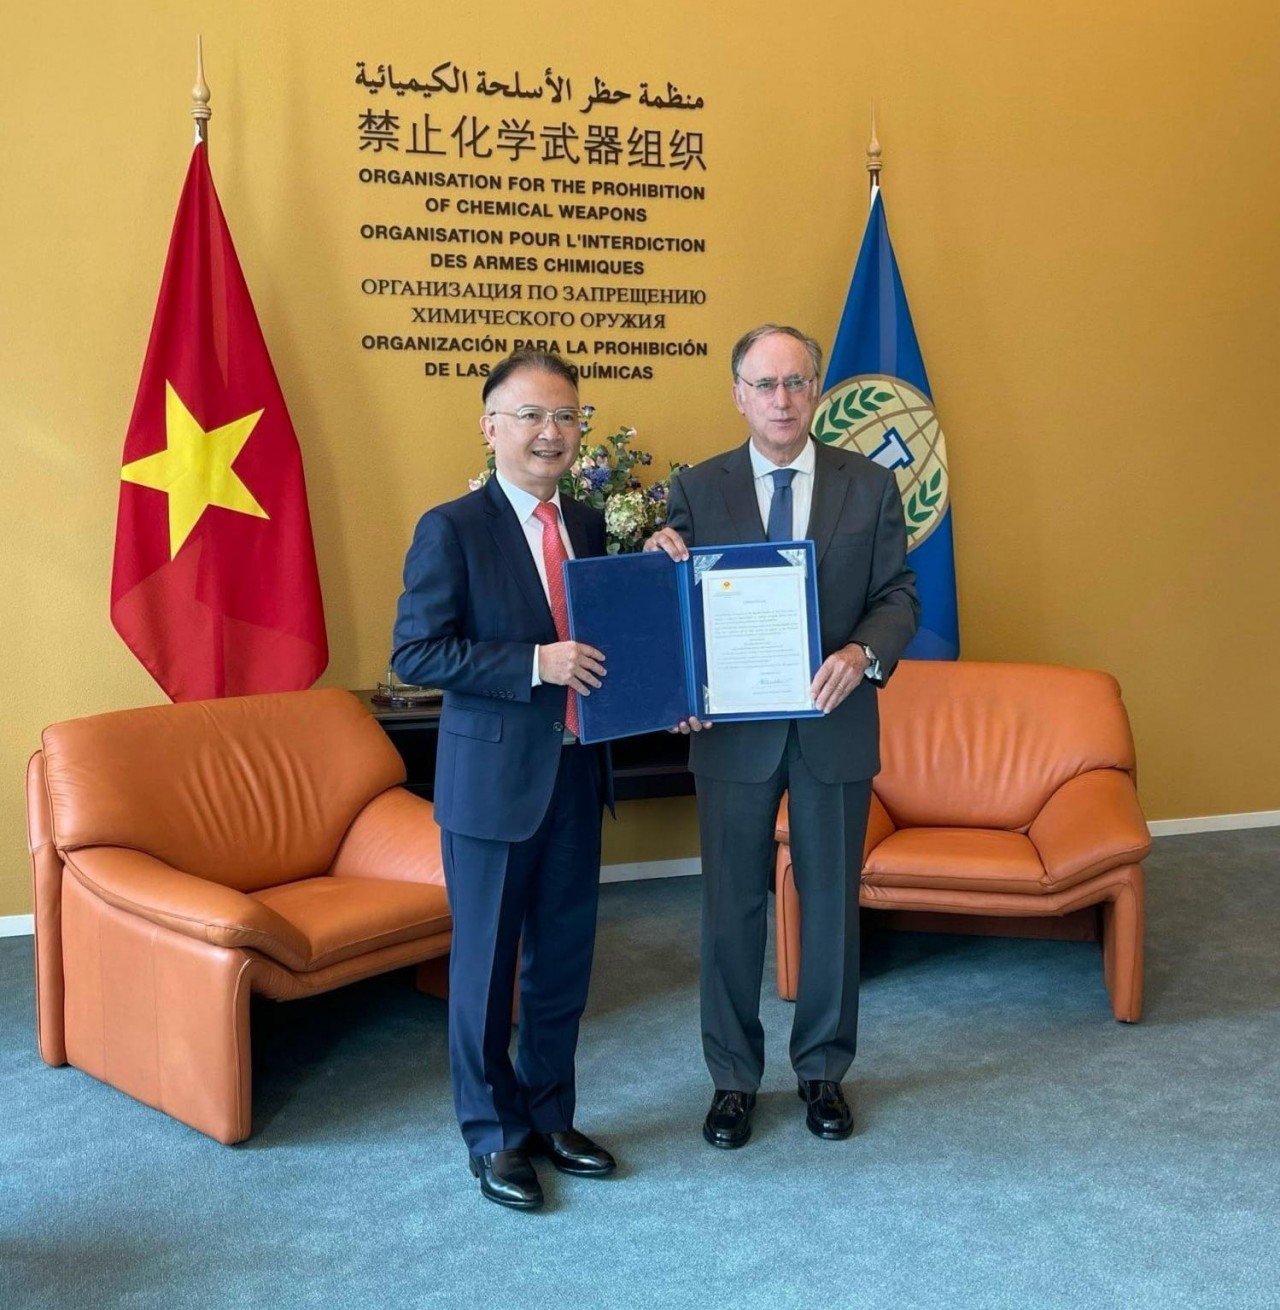 Vietnam Cooperates More with Organization for Prohibition of Chemical Weapons